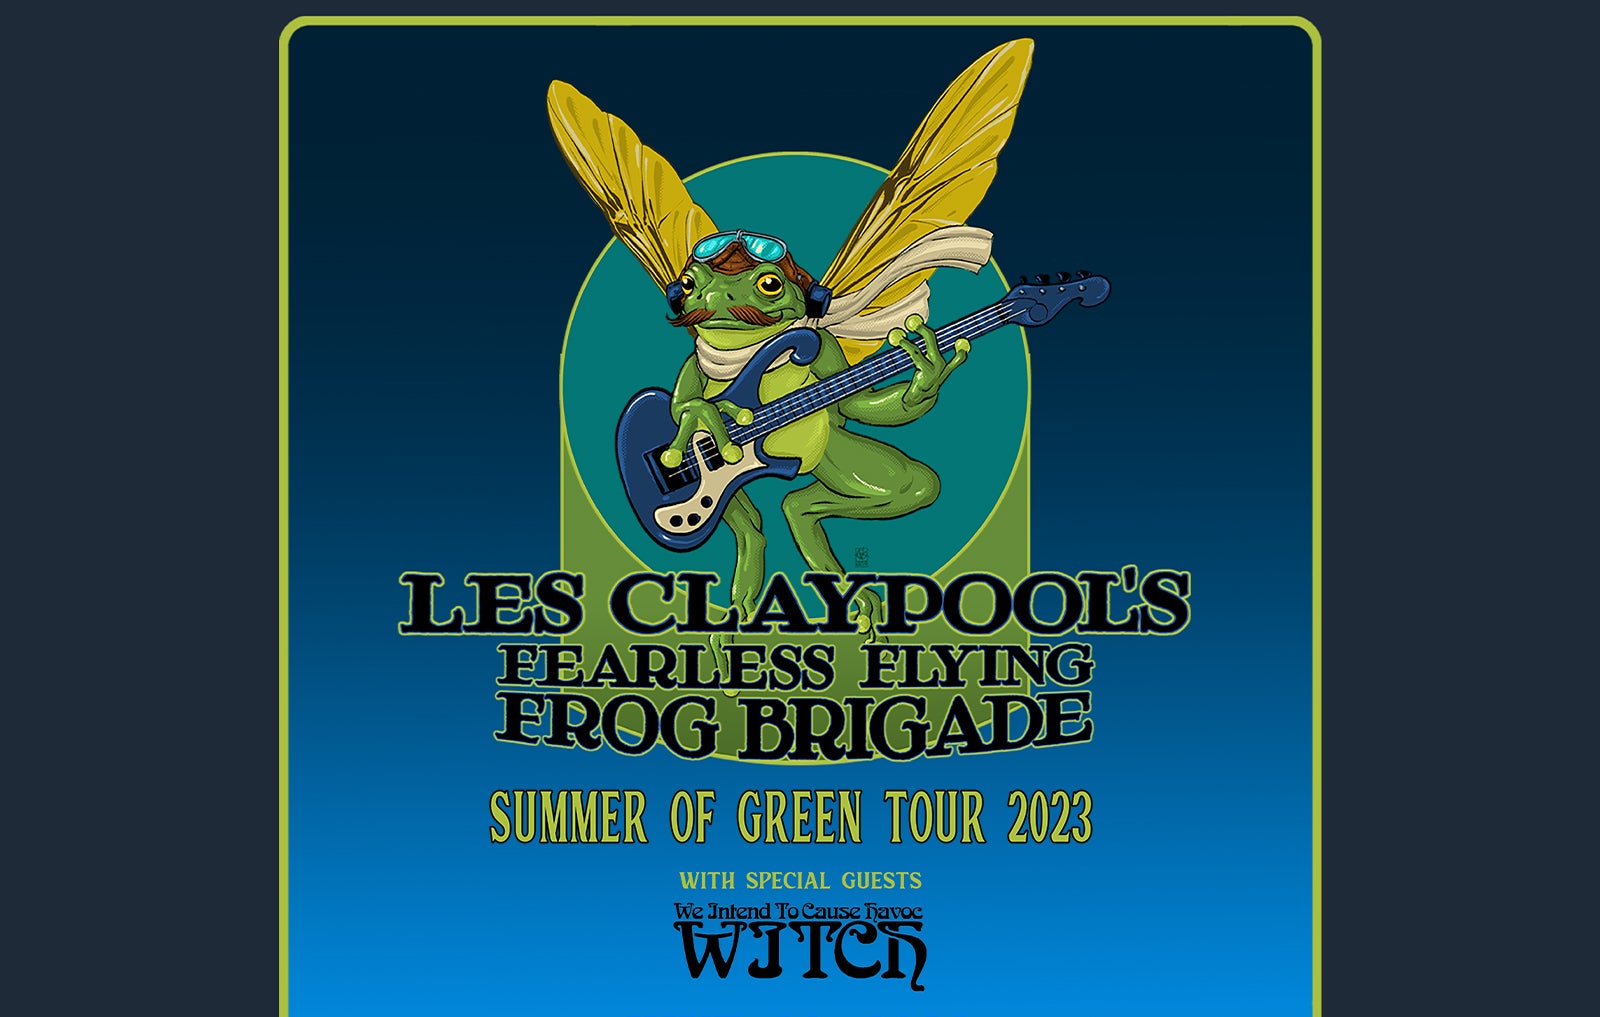 More Info for Les Claypool's Fearless Flying Frog Brigade: Summer of Green Tour 2023